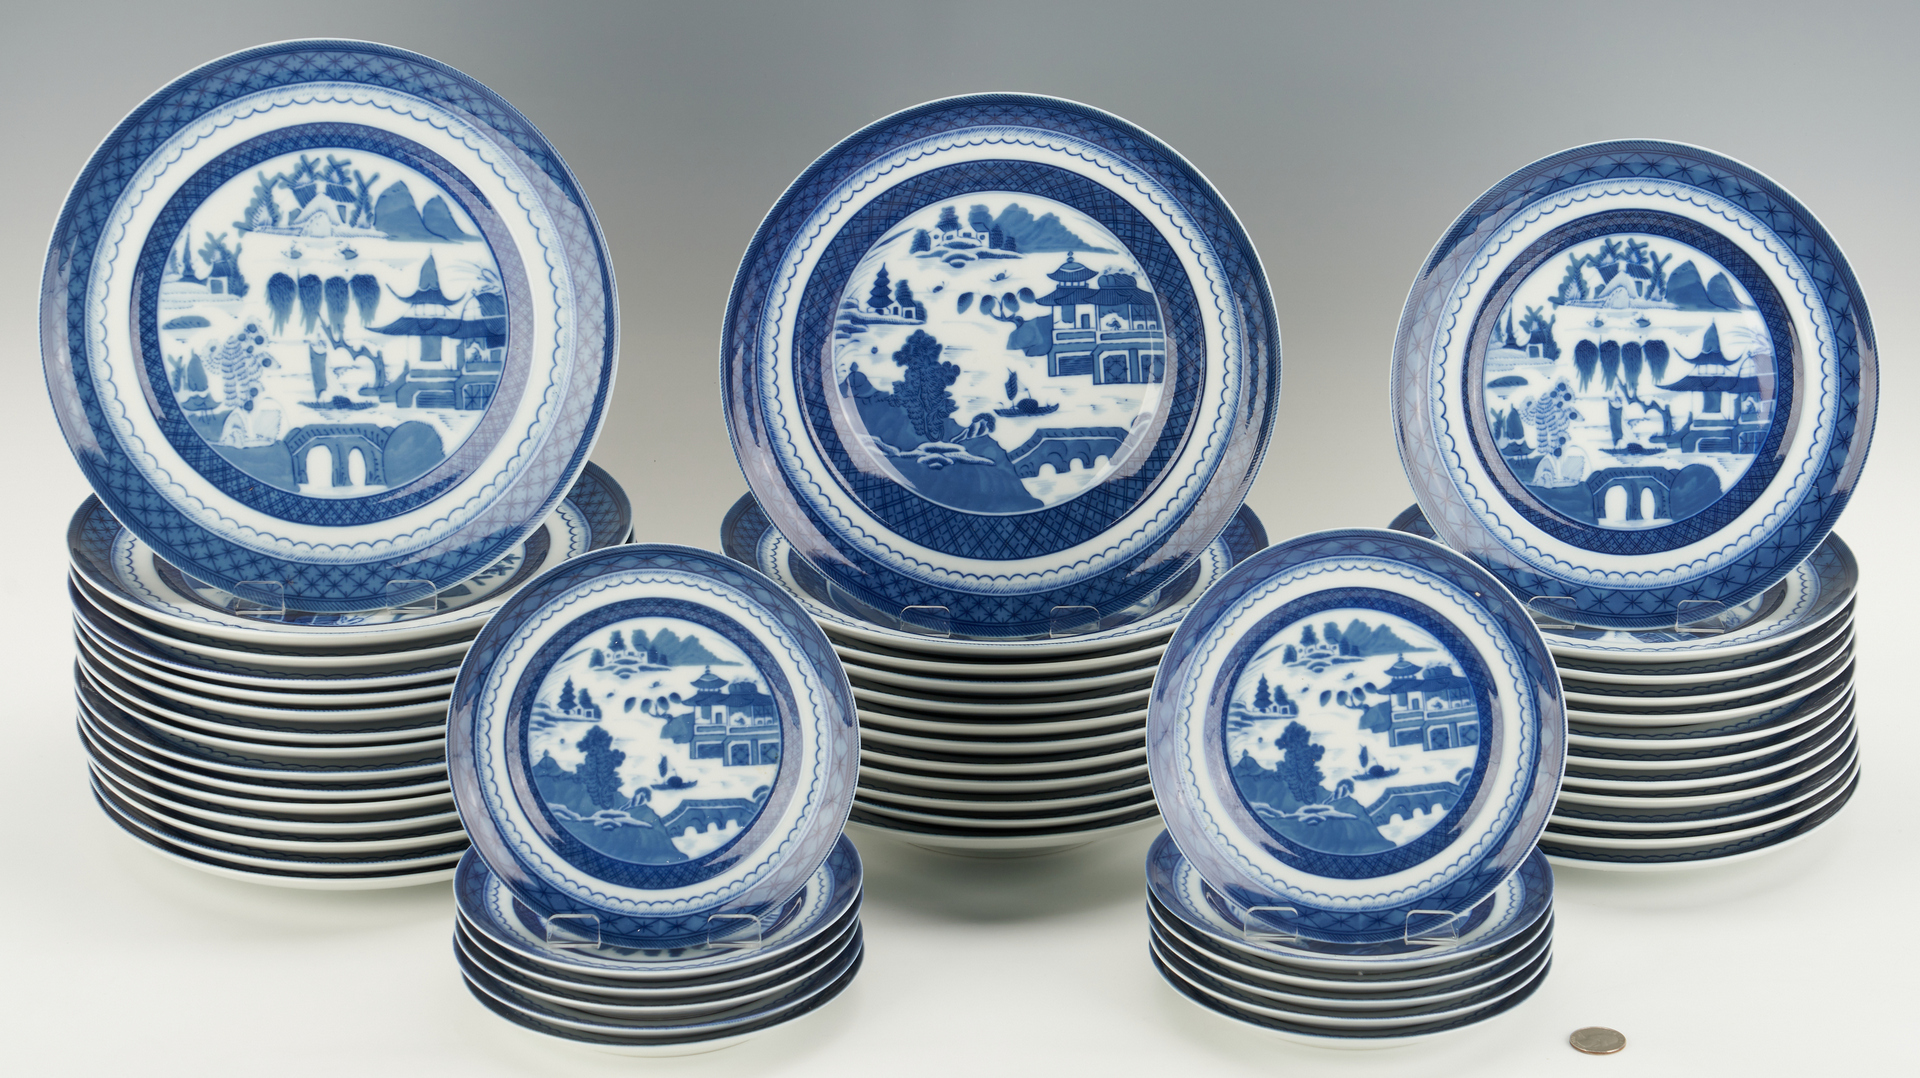 Lot 318: Mottahedeh Blue Canton Dinner Service for 12